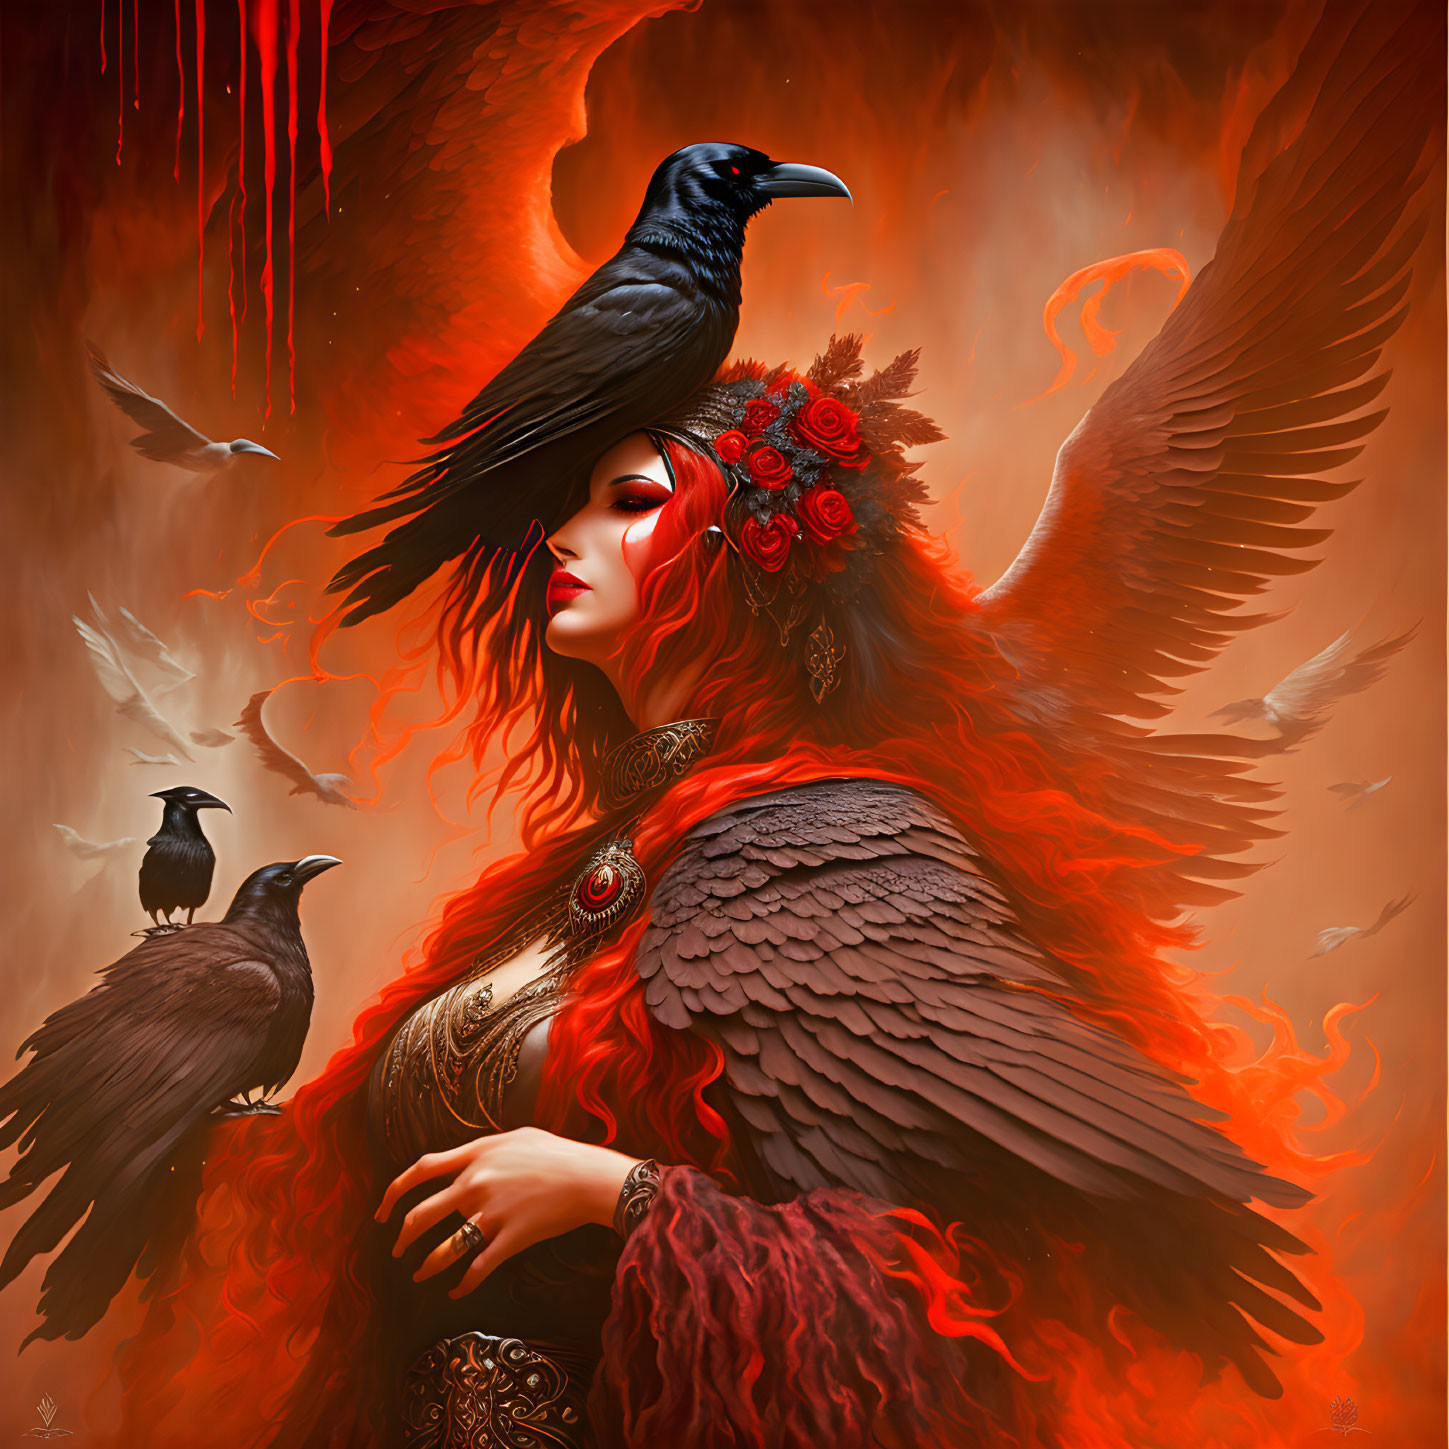 The Raven Goddess of mist and blood